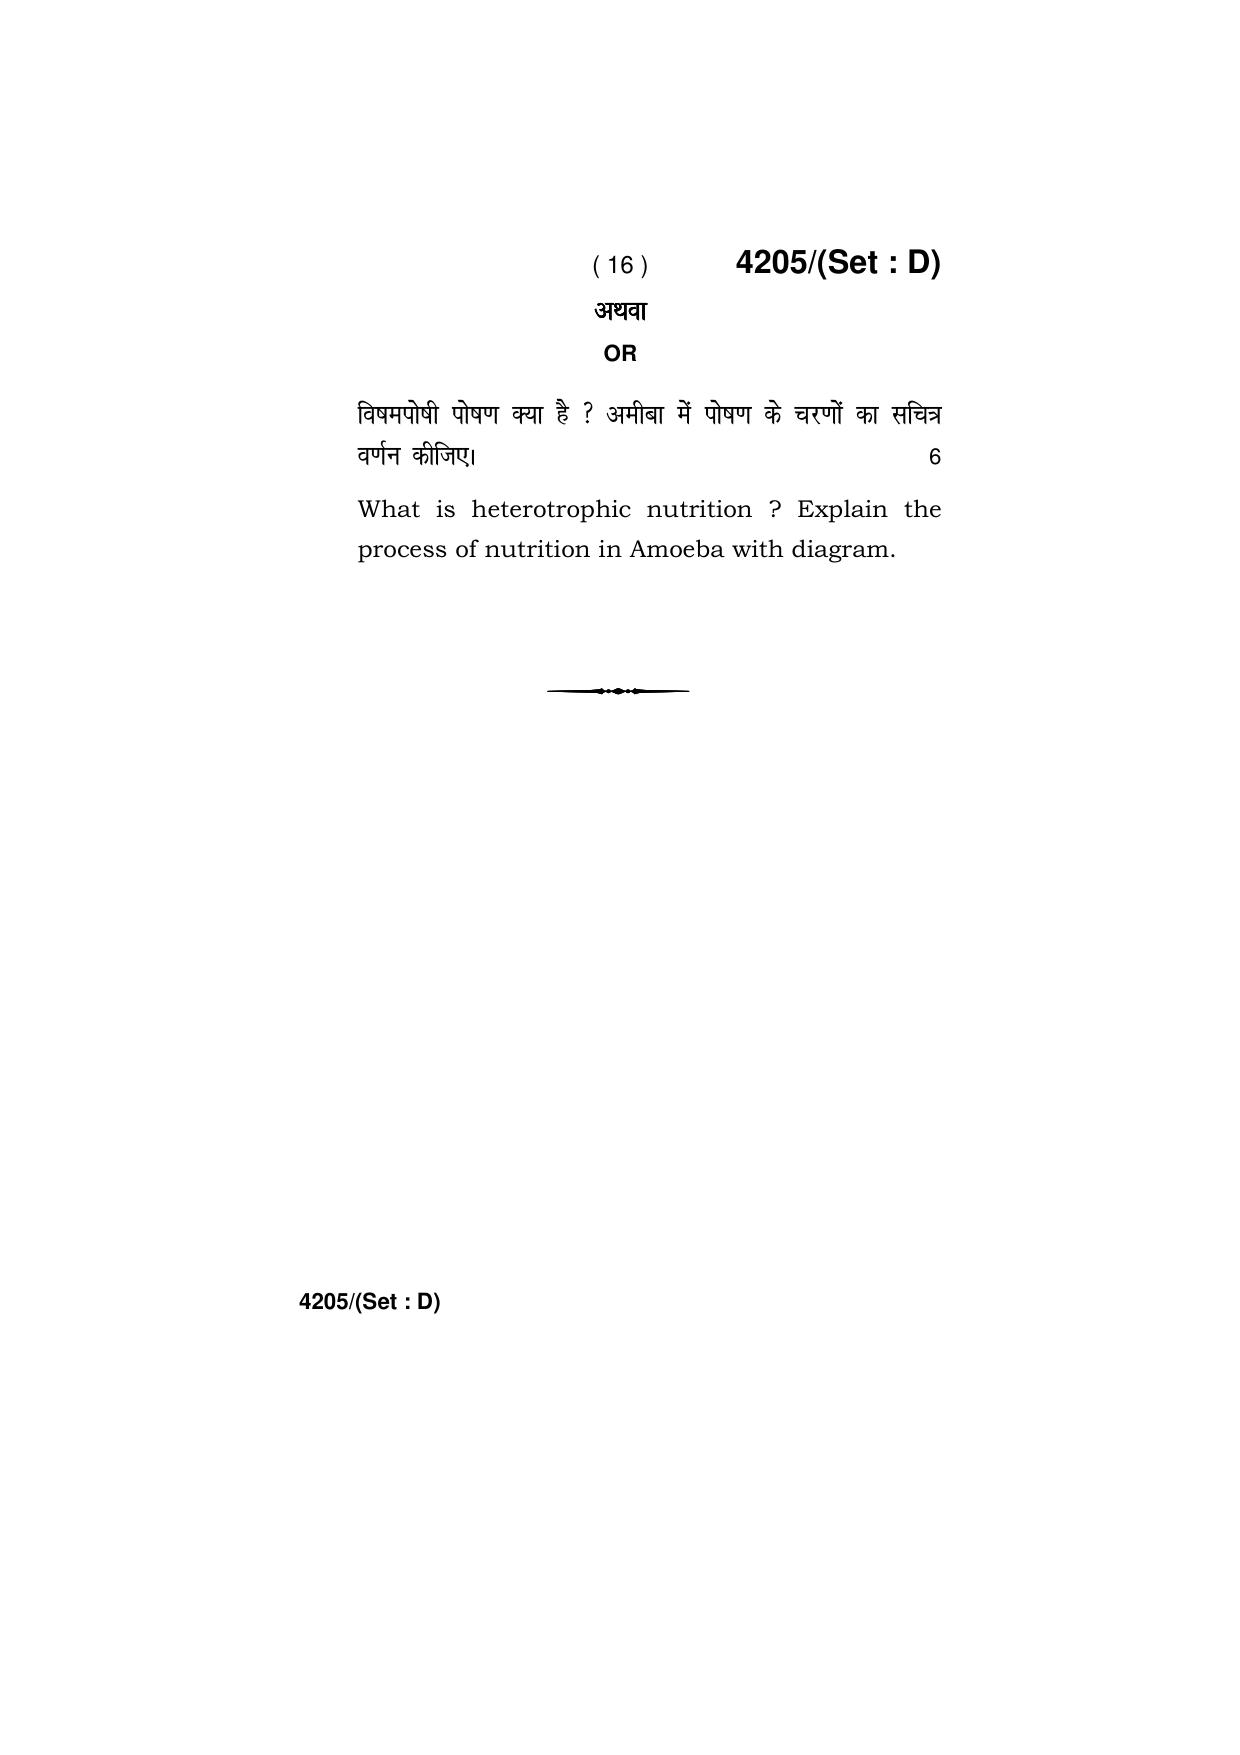 Haryana Board HBSE Class 10 Science (All Set) 2019 Question Paper - Page 64